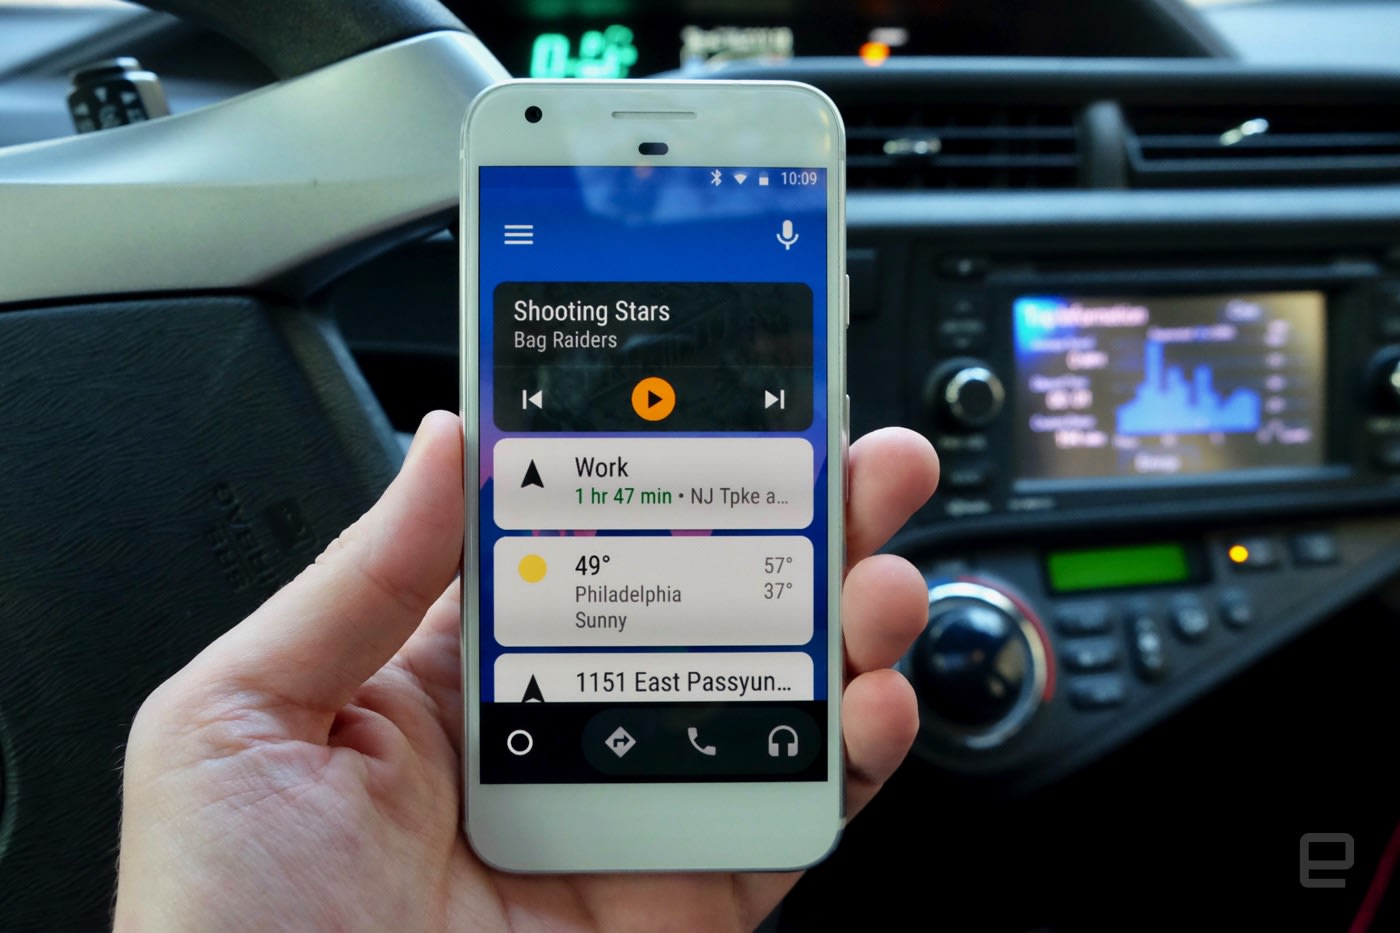 Android Auto is now a standalone app you can download to your phone